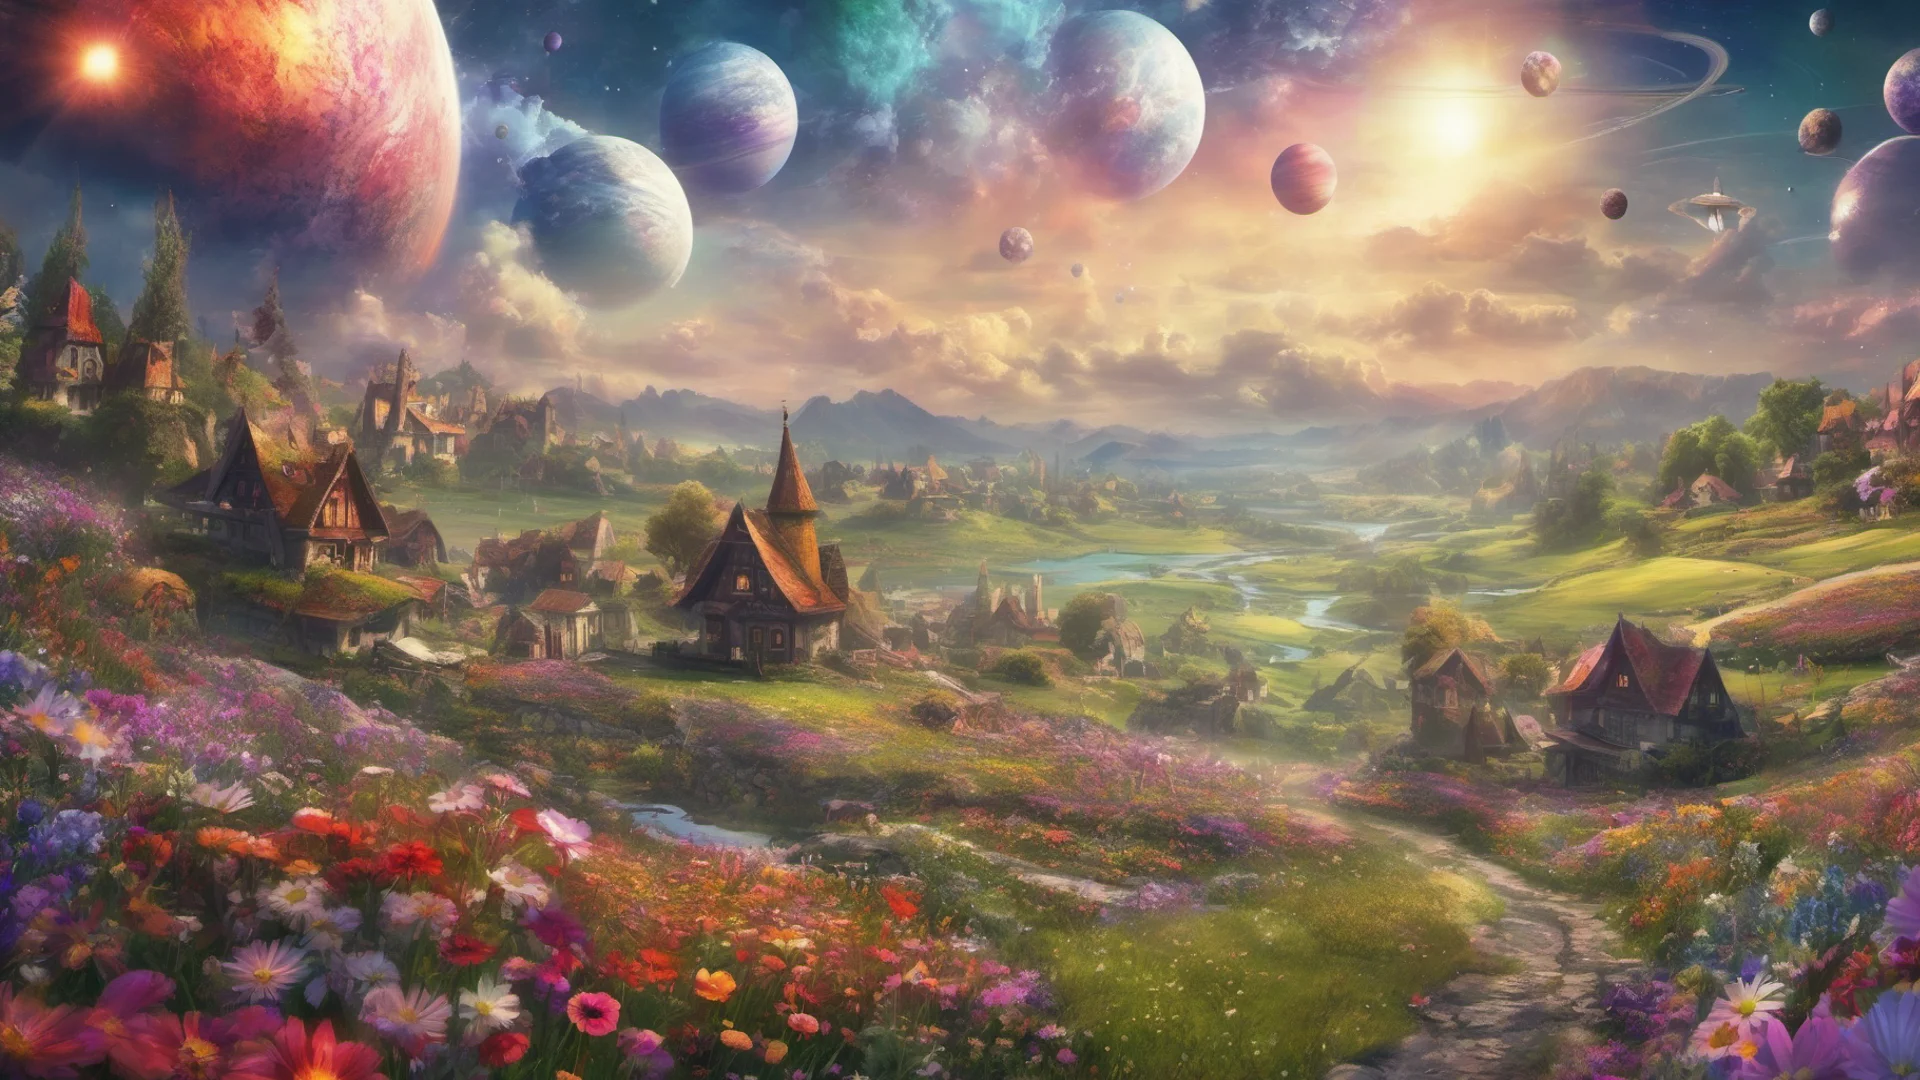 epic fantasy background colorful flower meadows village covered in flowers two saturn ringed planets overhead confident engaging wow artstation art 3 wide